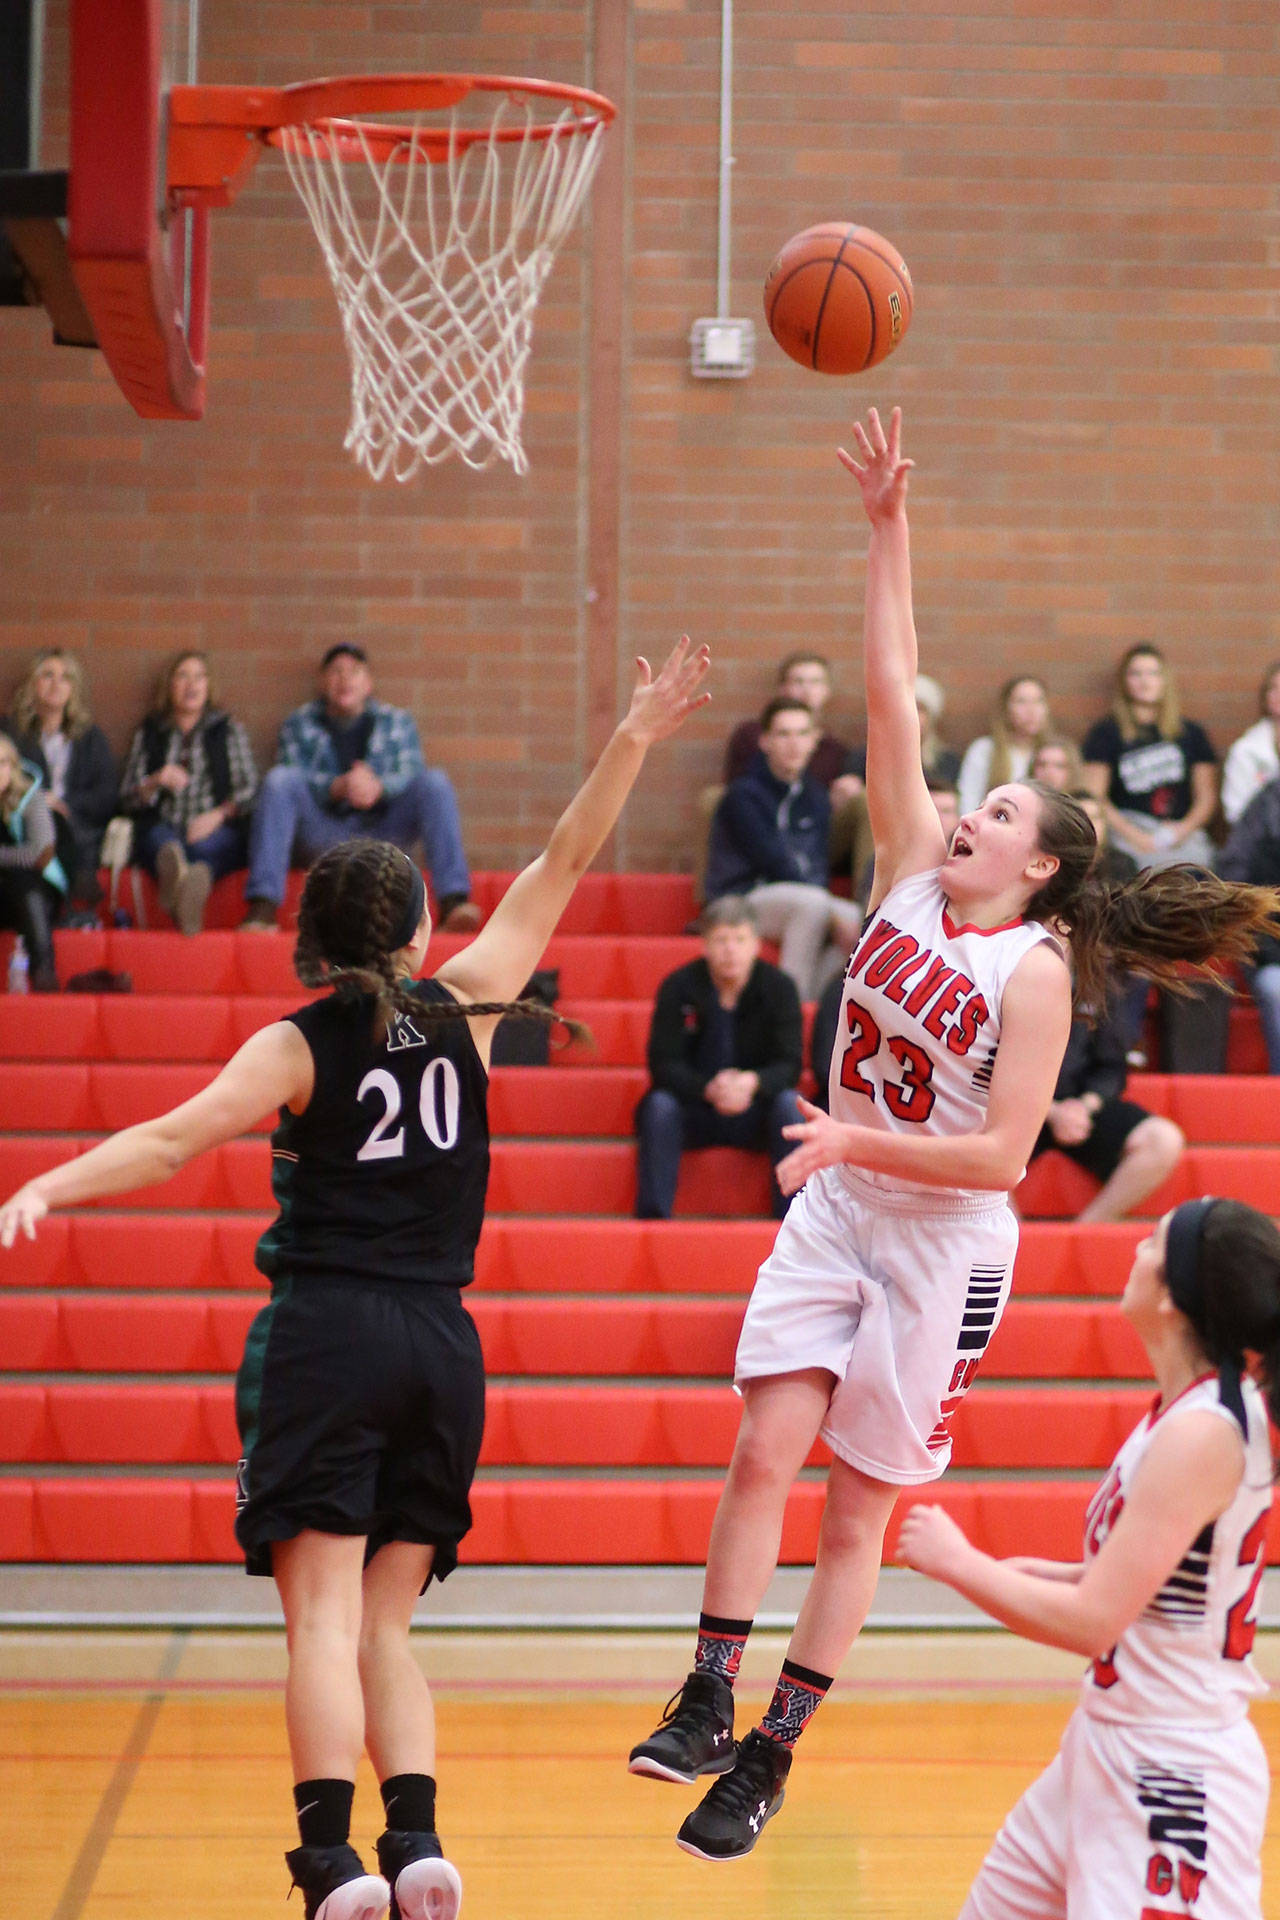 Senior Mikayla Elfrank (23) will help supply some scoring punch for the Wolves this winter. (Photo by John Fisken)